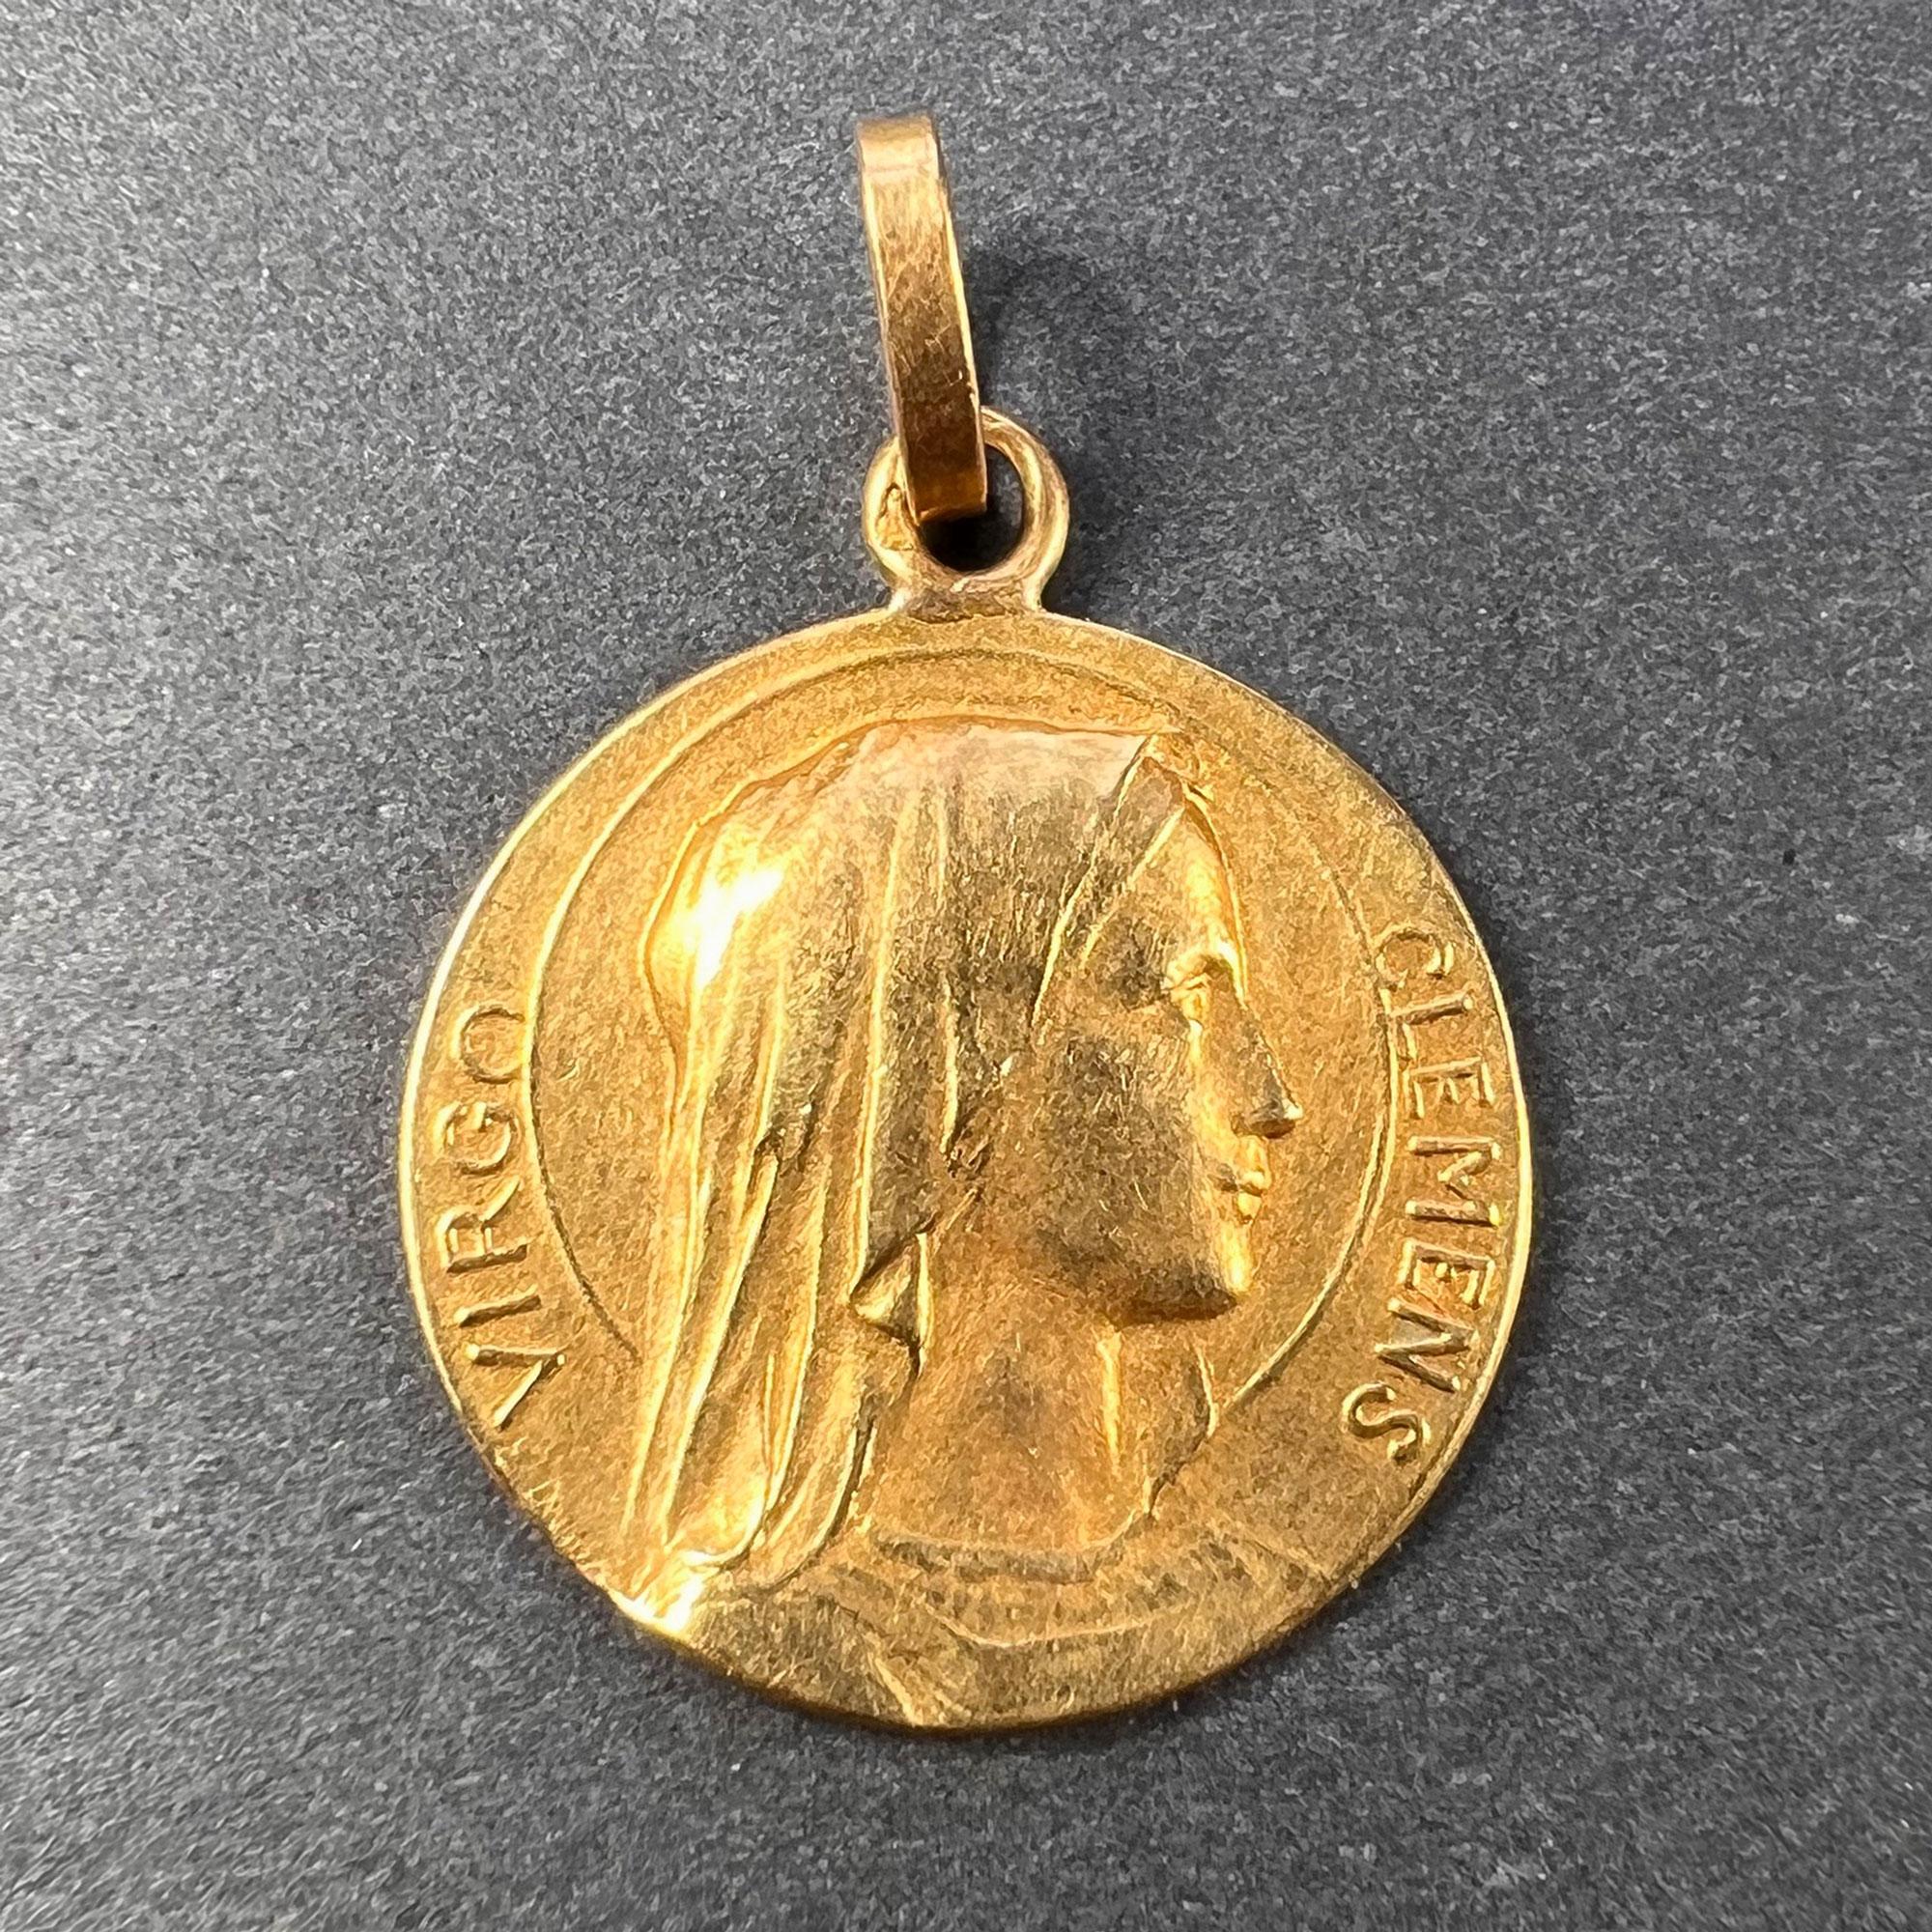 An 18 karat (18K) yellow gold charm pendant designed as a medal depicting the Virgin Mary, detailing the words Virgo Clemens for Blessed Mother. Signed E. Dropsy, stamped with the eagle mark for 18 karat gold and French manufacture with an unknown